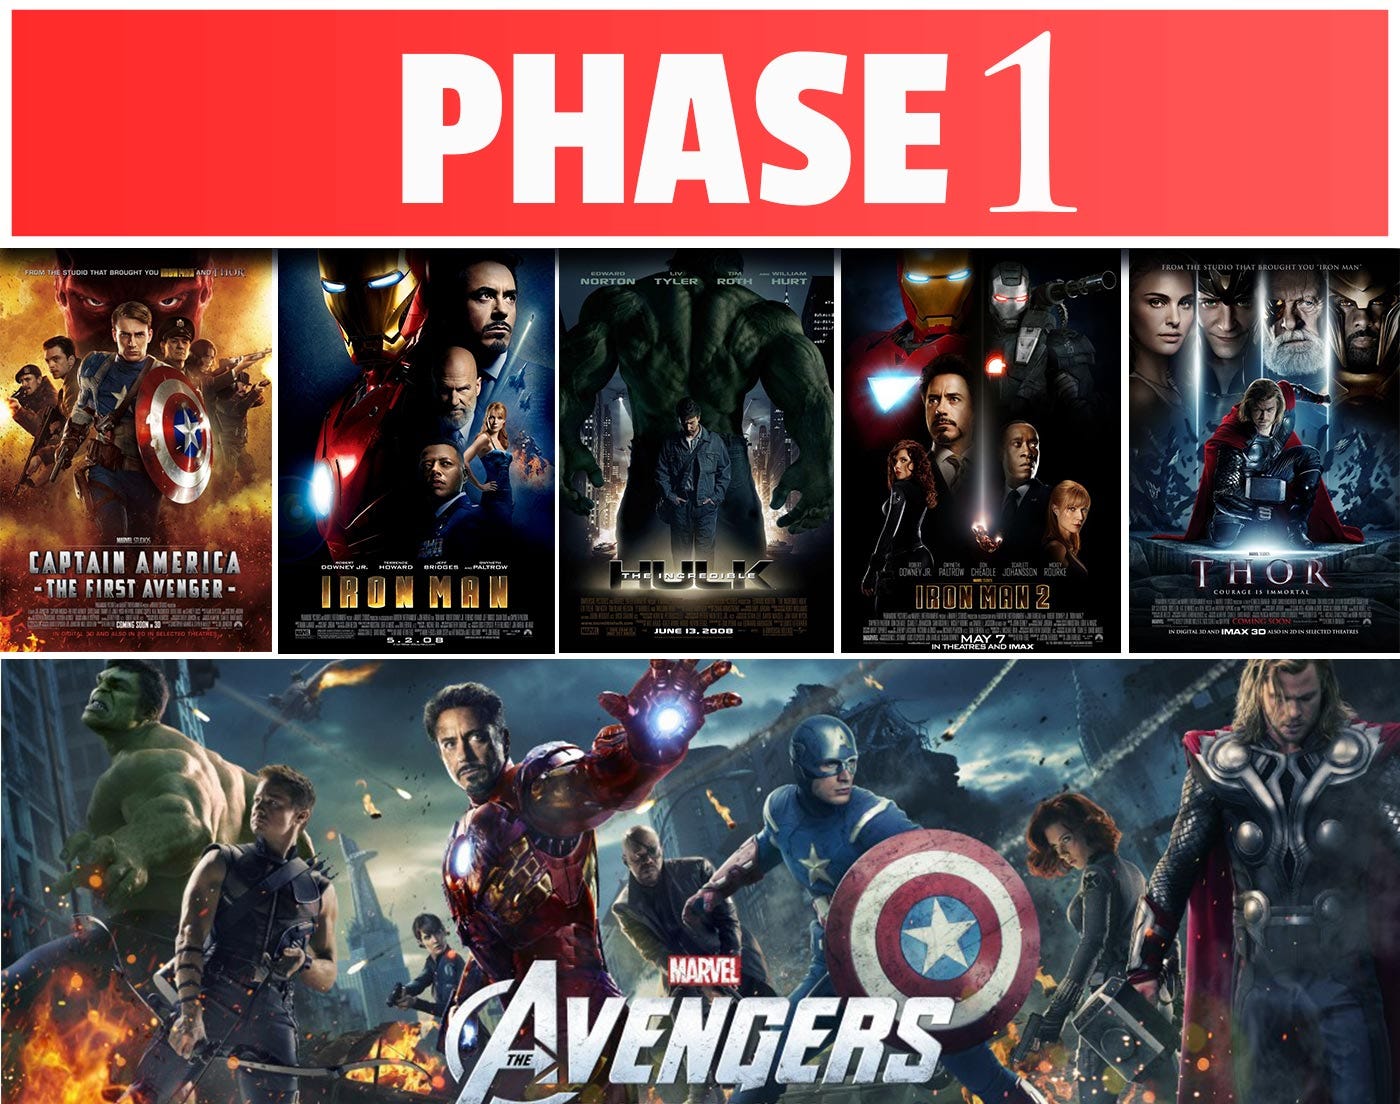 The Visual Guide to the Marvel Cinematic Universe : Phase 1 | by Clinton  Mutinda | The Geek Interpreter | Medium